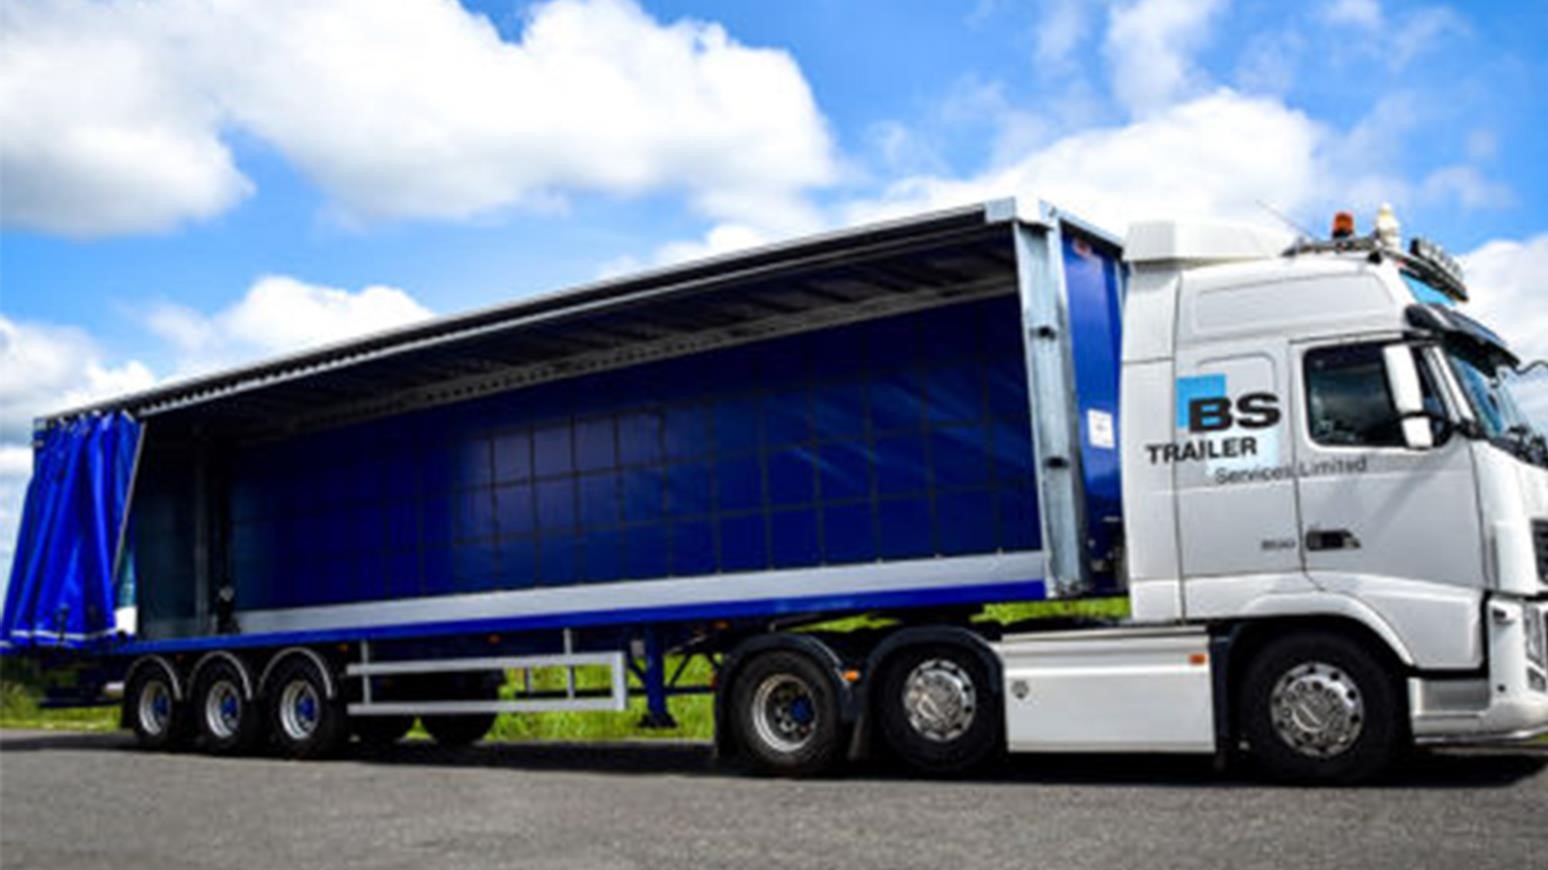 BS Trailer Services Orders £2 Million Of New Curtainside Trailers From SDC